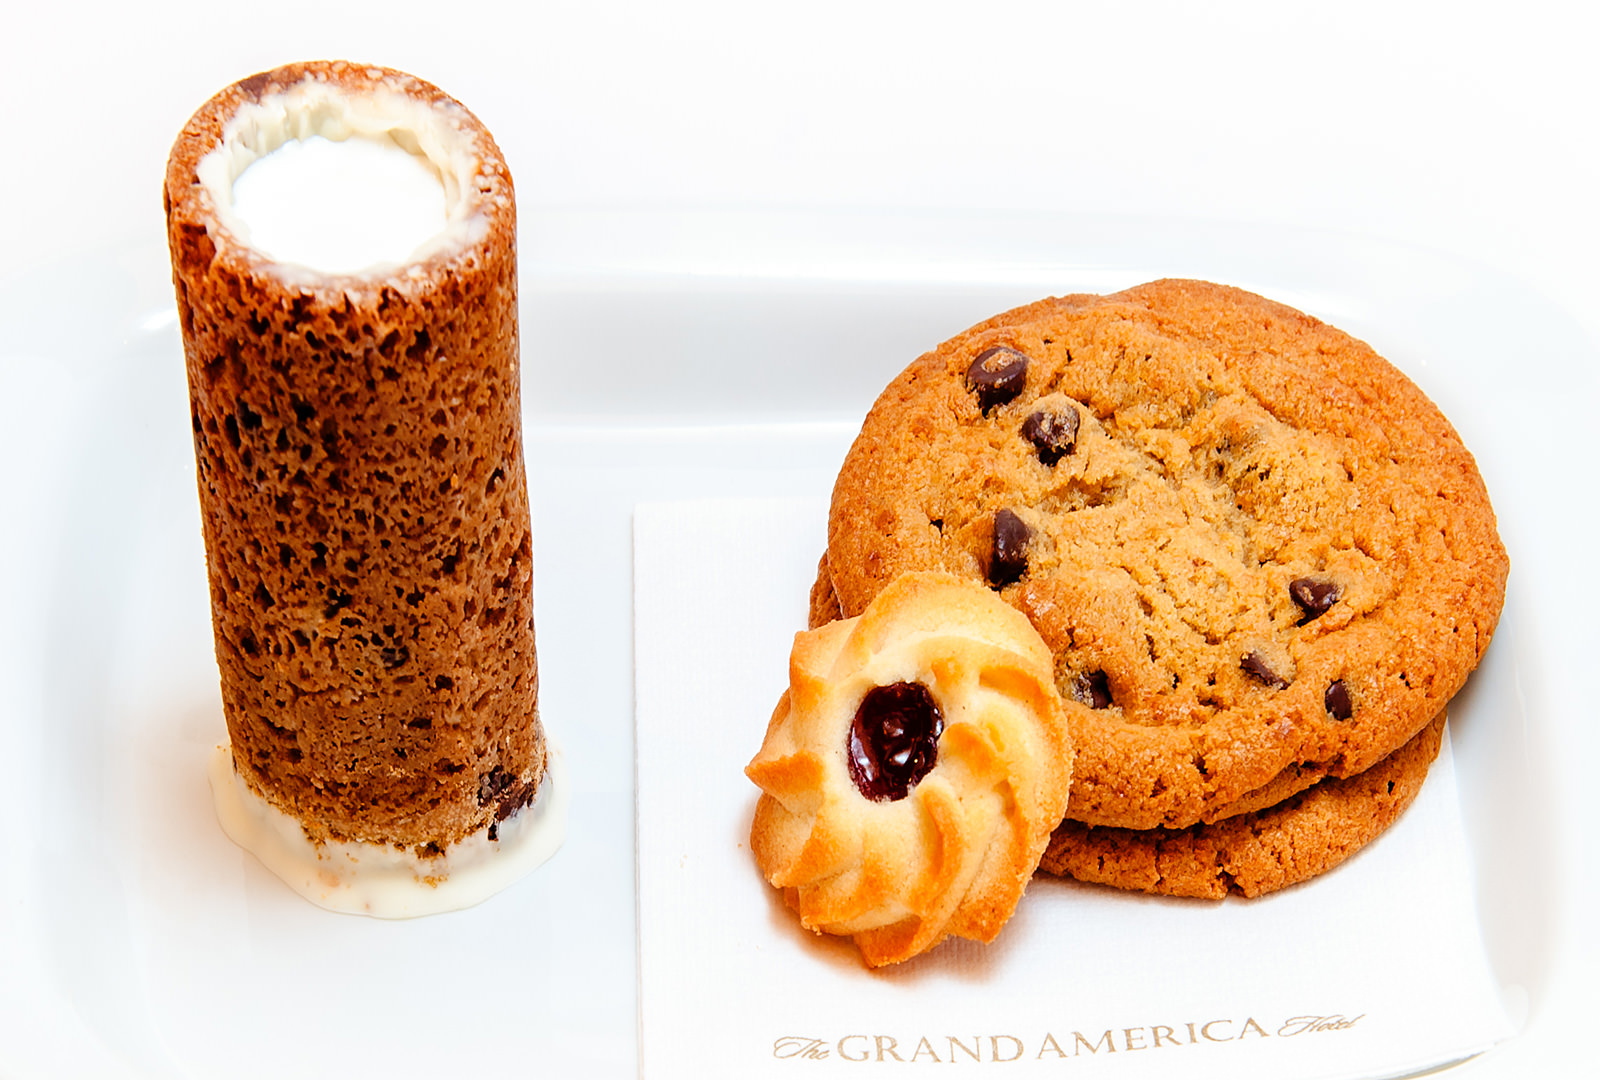 The Grand America Hotel Cookie Assortment Served with Milk